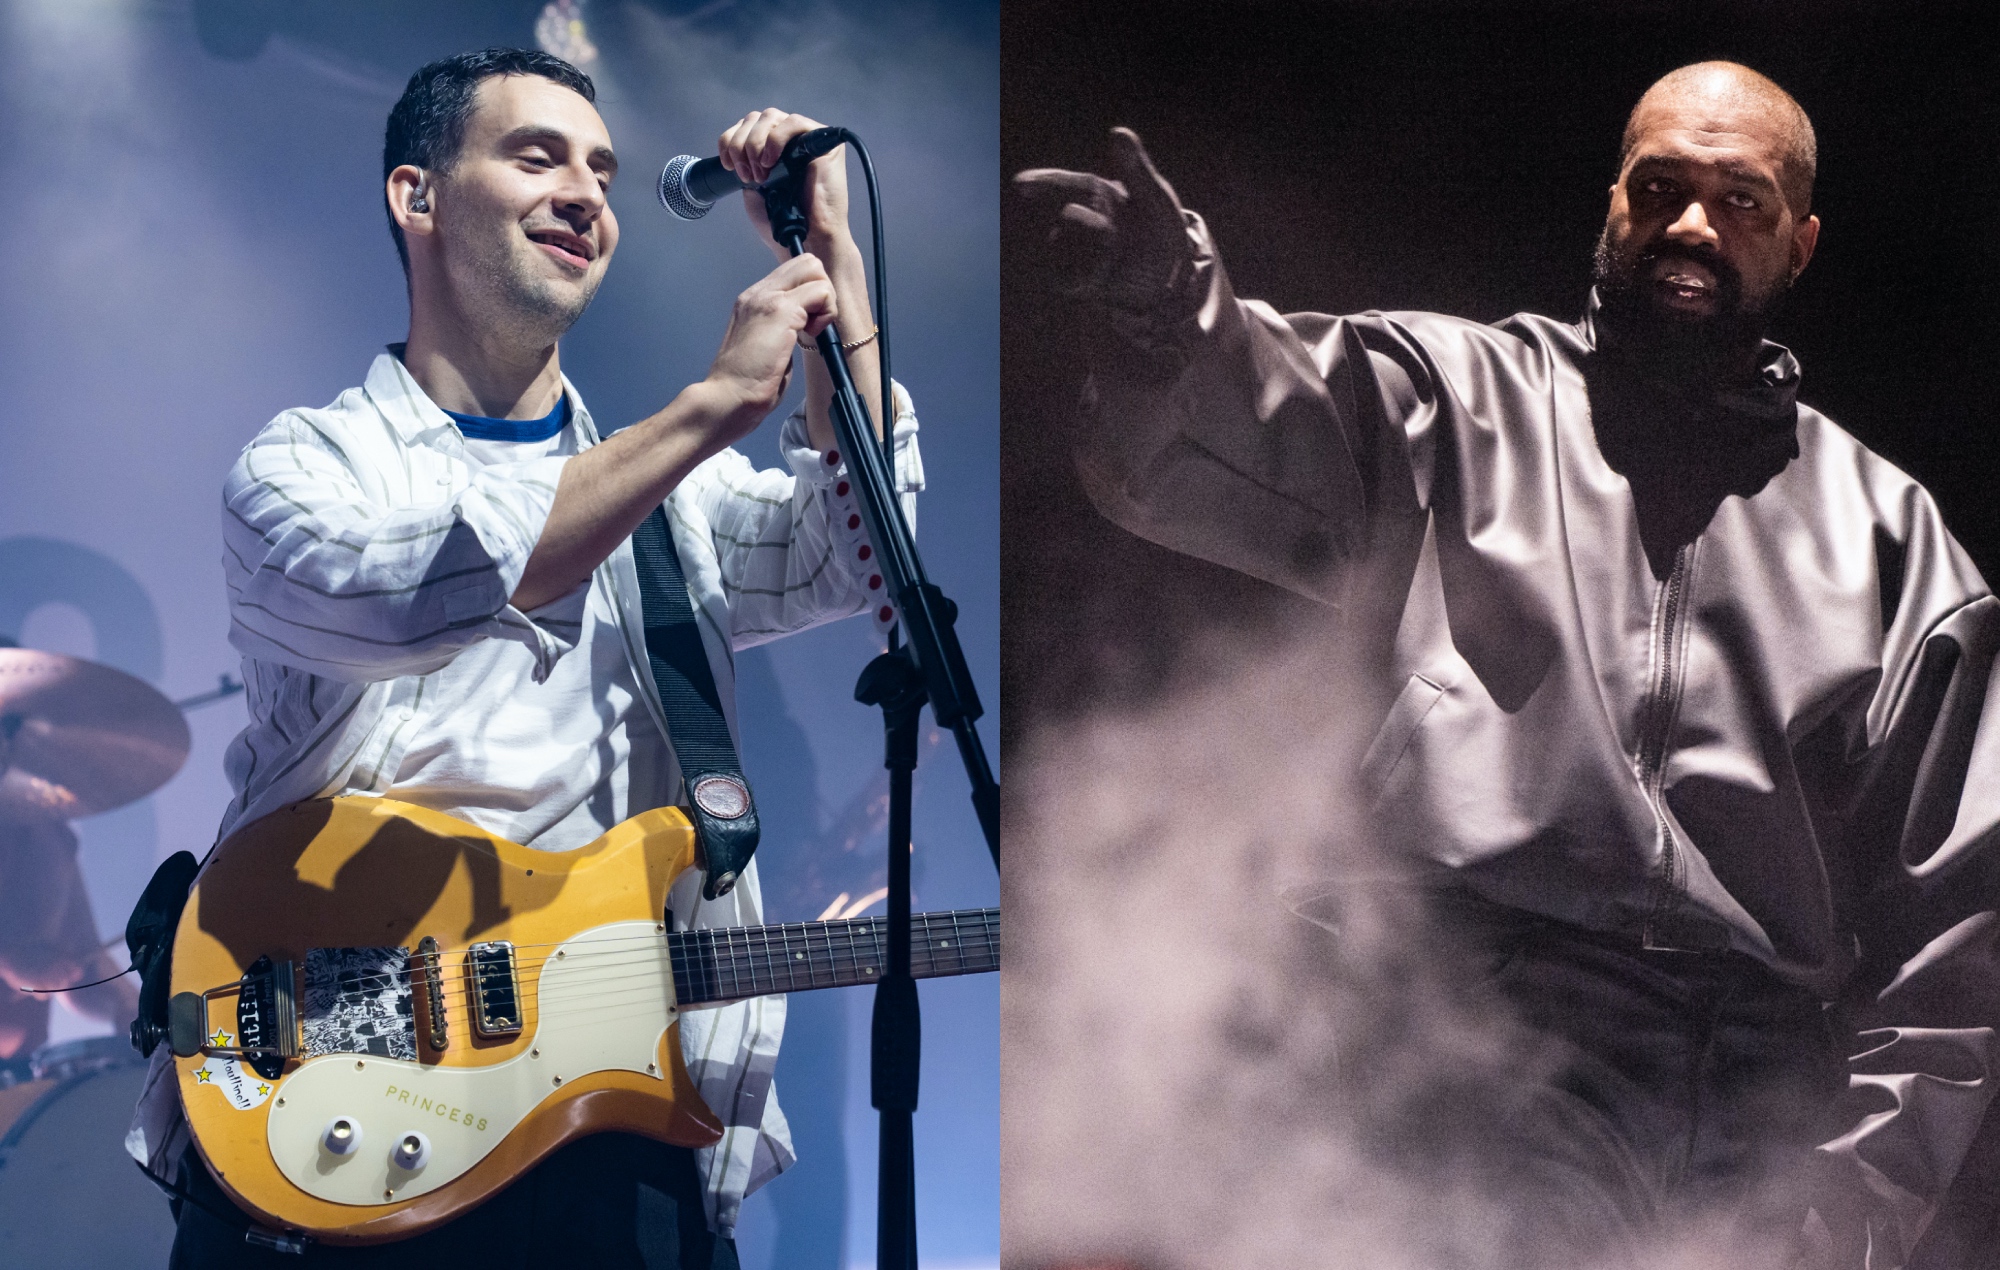 Jack Antonoff hits out at Kanye West again: “Your diaper is so full”